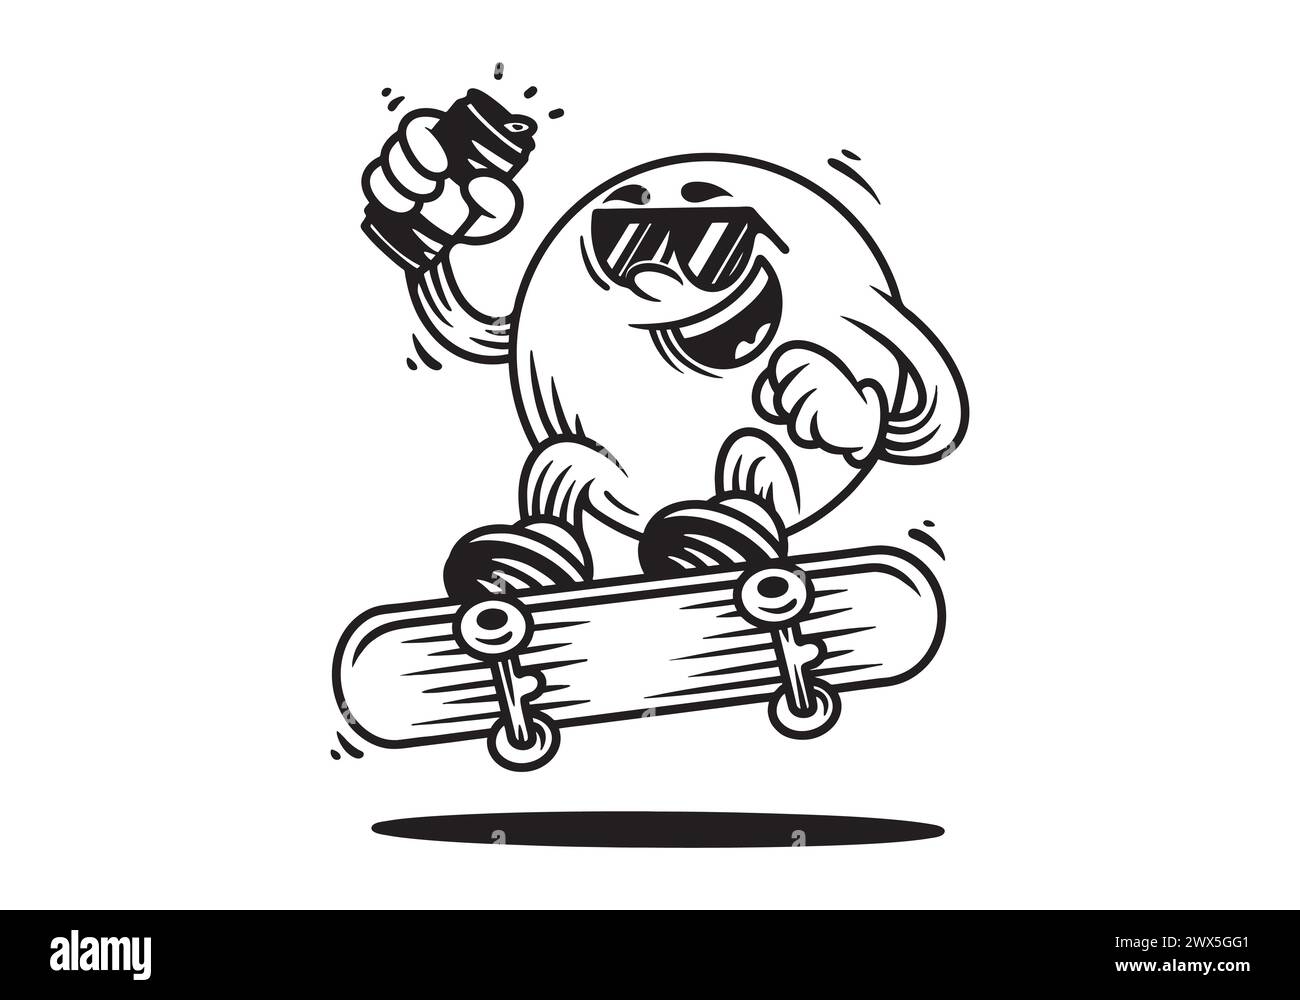 Line art Mascot character of ball head jumping on the skateboard. Holding a beer can Stock Vector